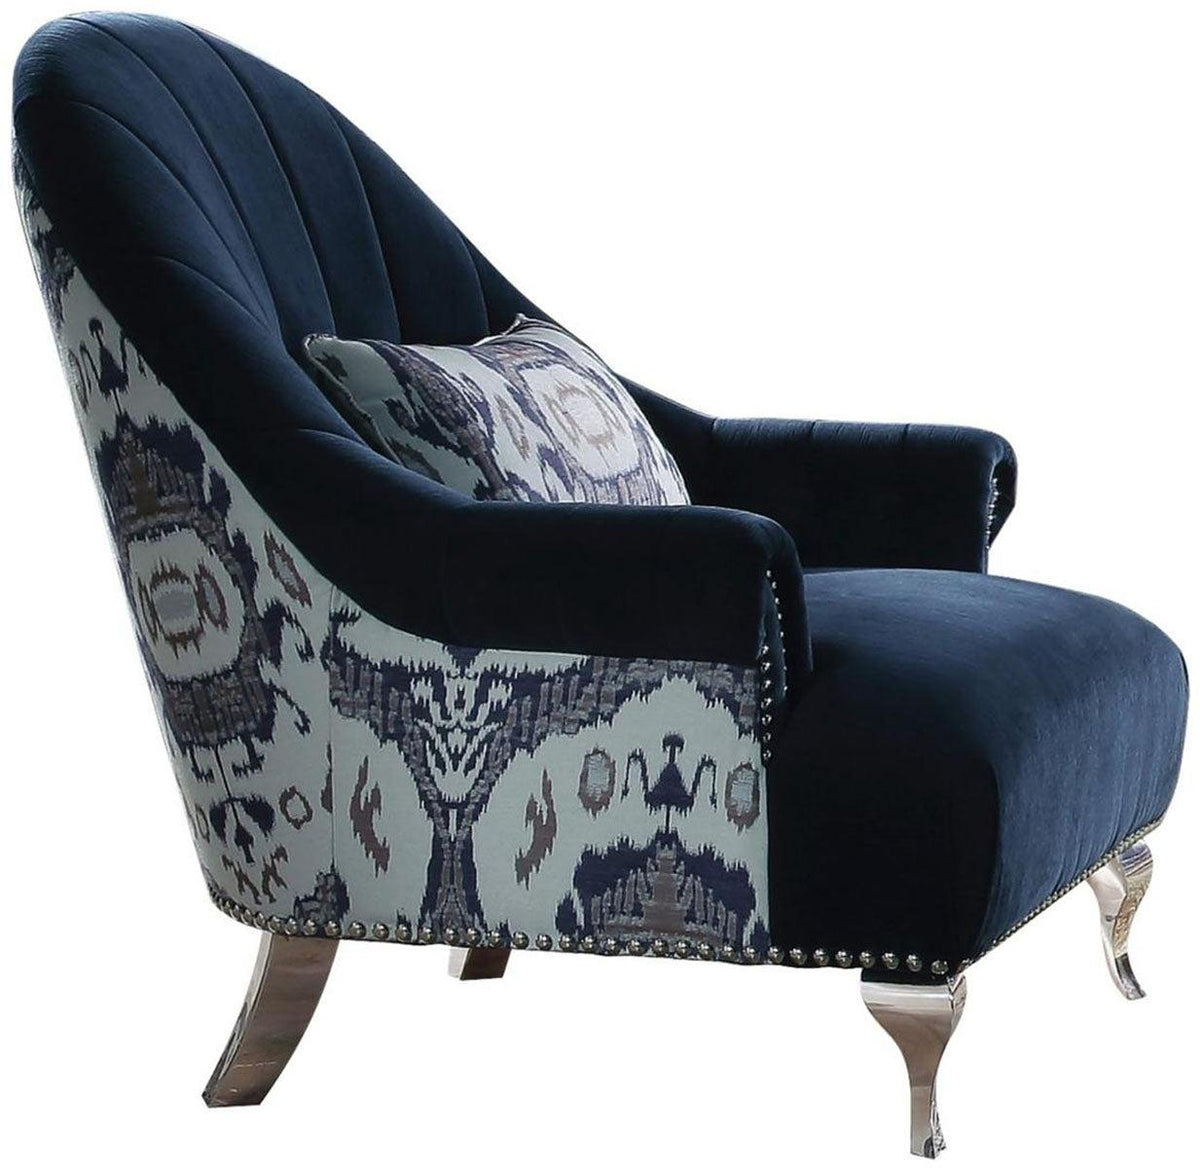 Acme Furniture Jaborosa Chair with 1 Pillow in Blue 50347  Las Vegas Furniture Stores